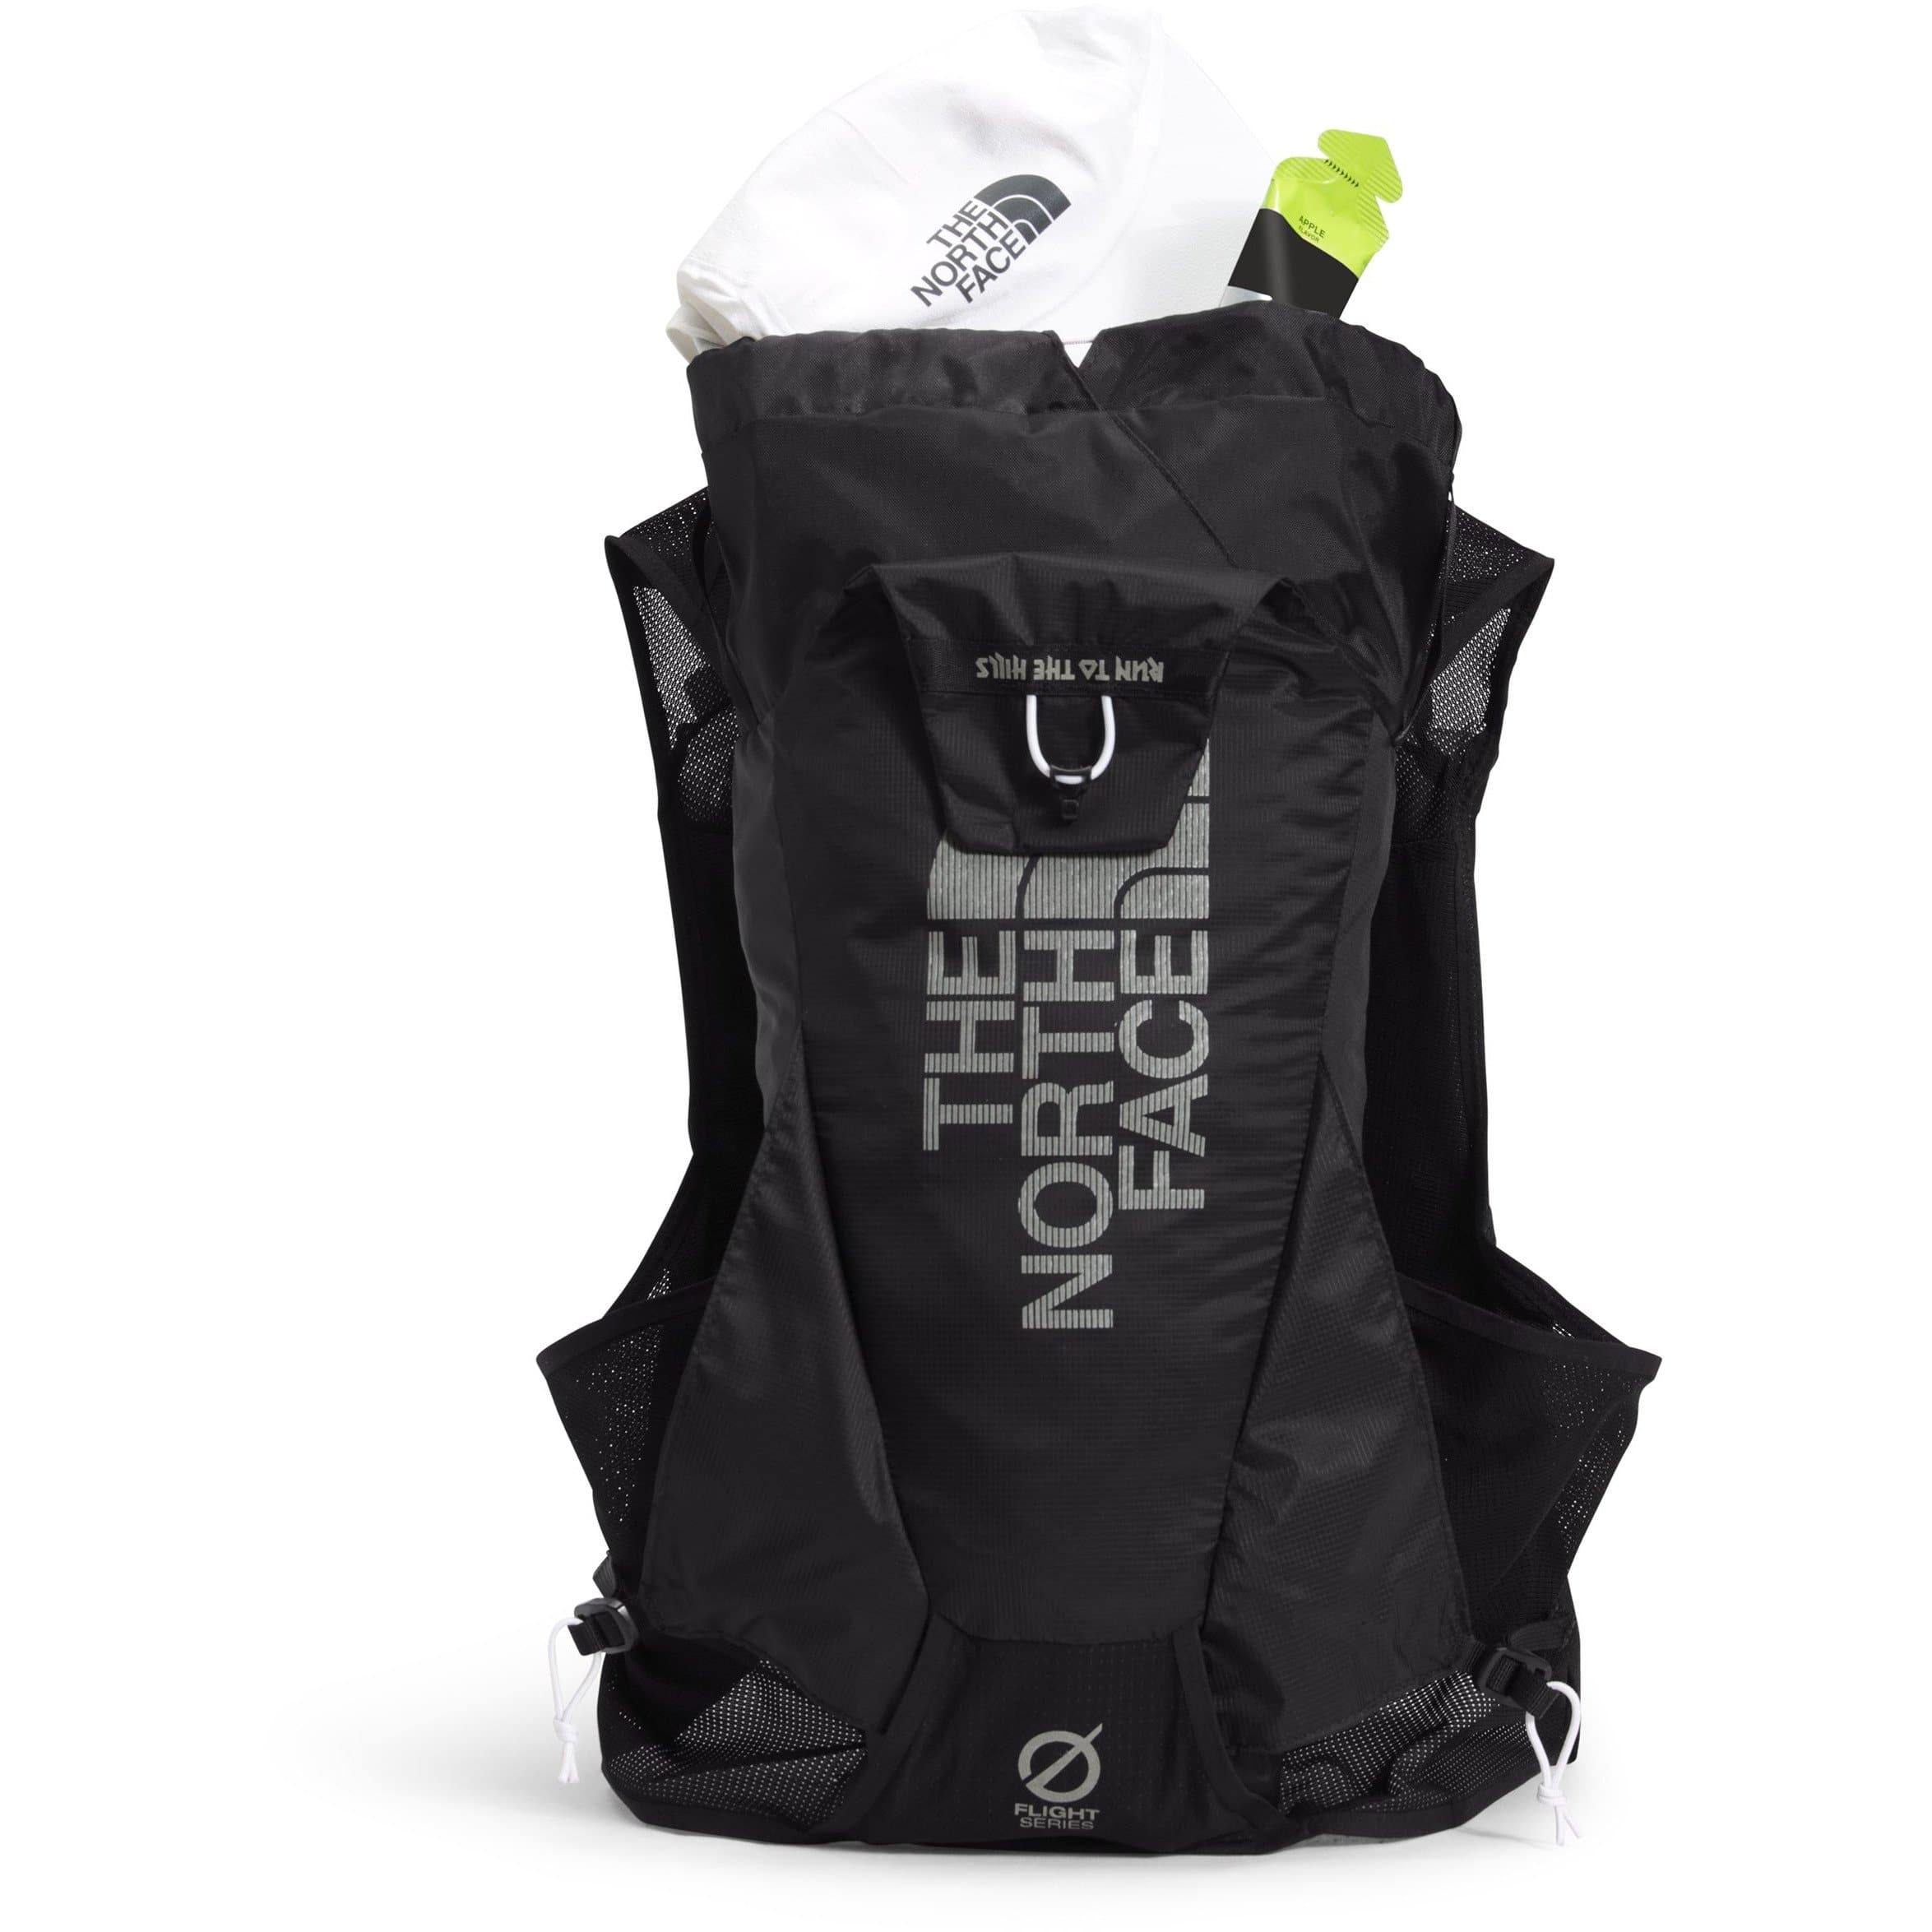 The North Face Flight Training Pack 12 – Cripple Creek Backcountry